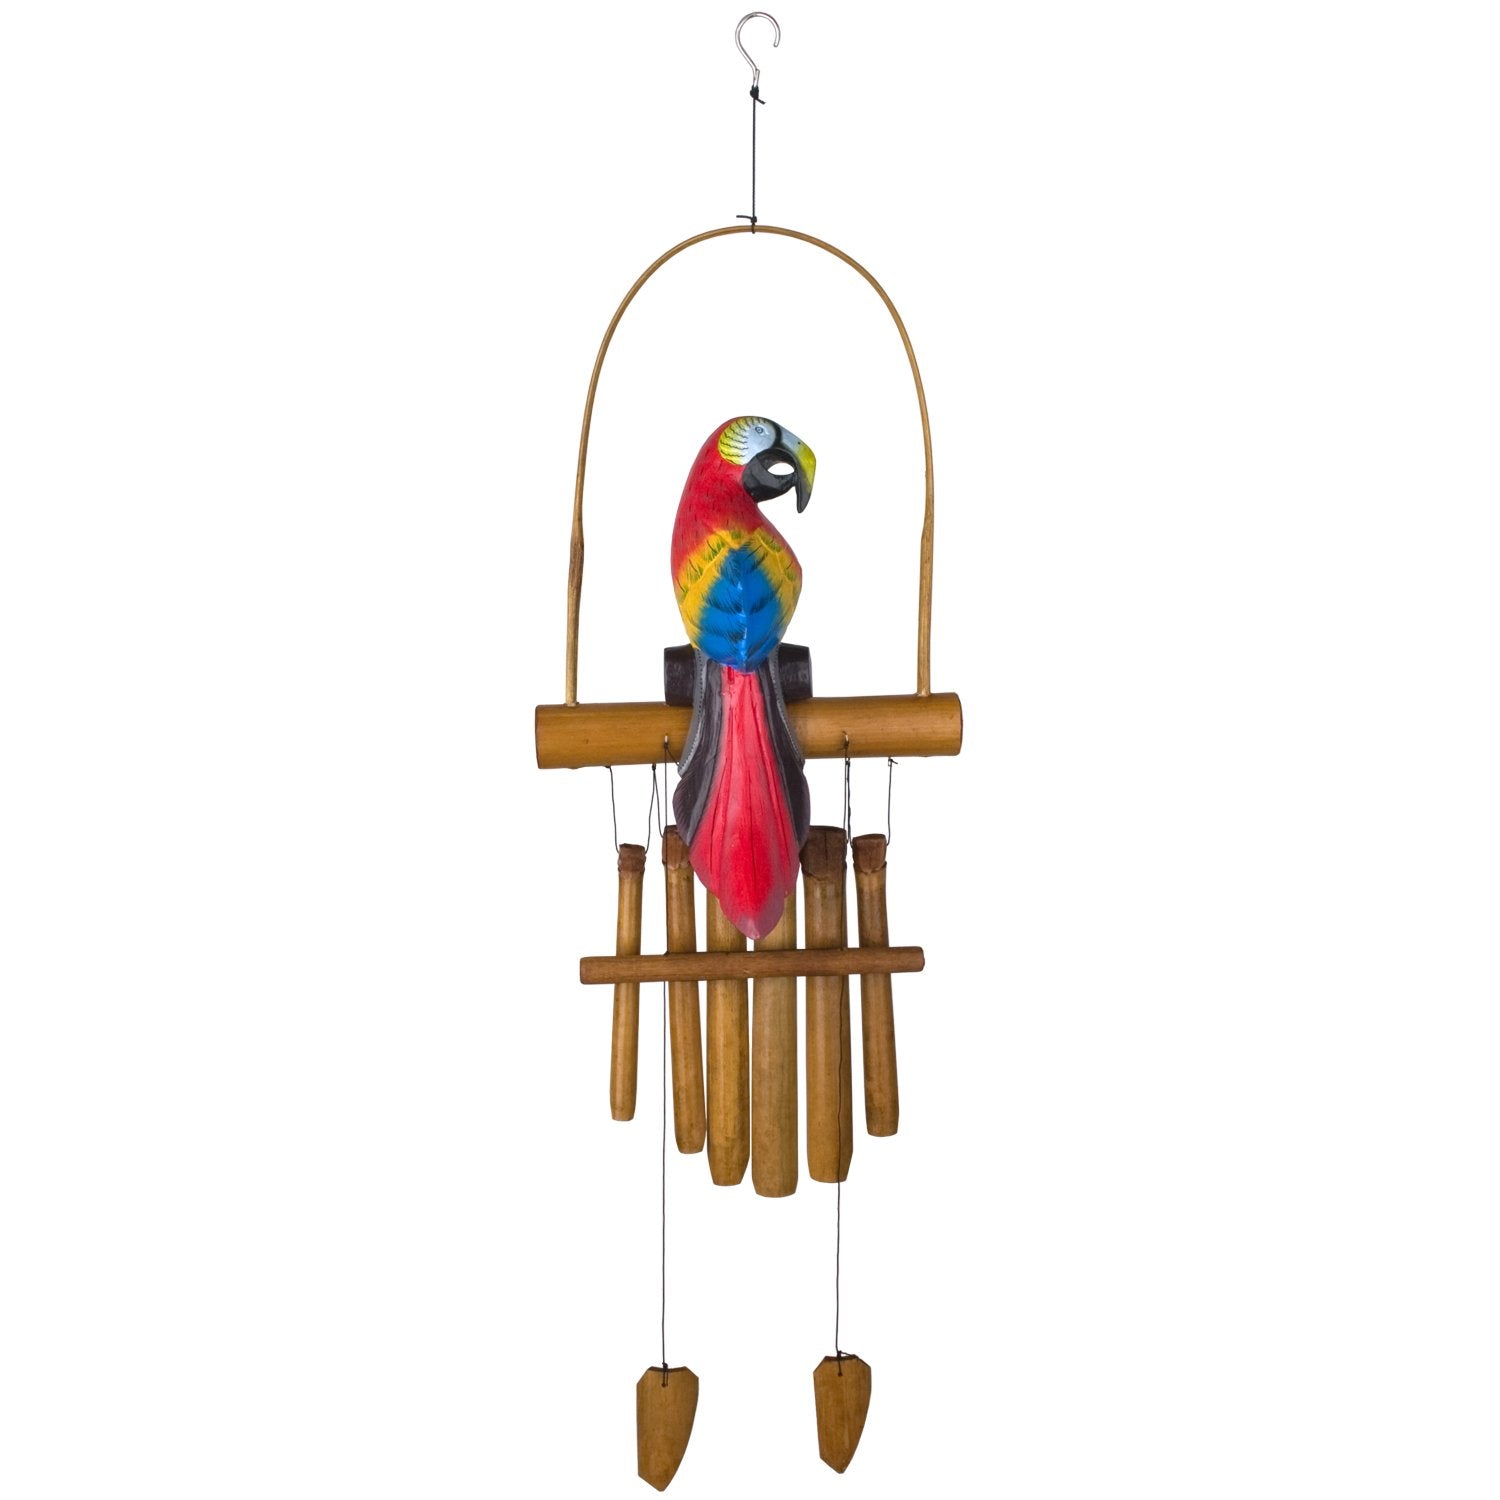 Animal Bamboo Chime - Parrot full product image